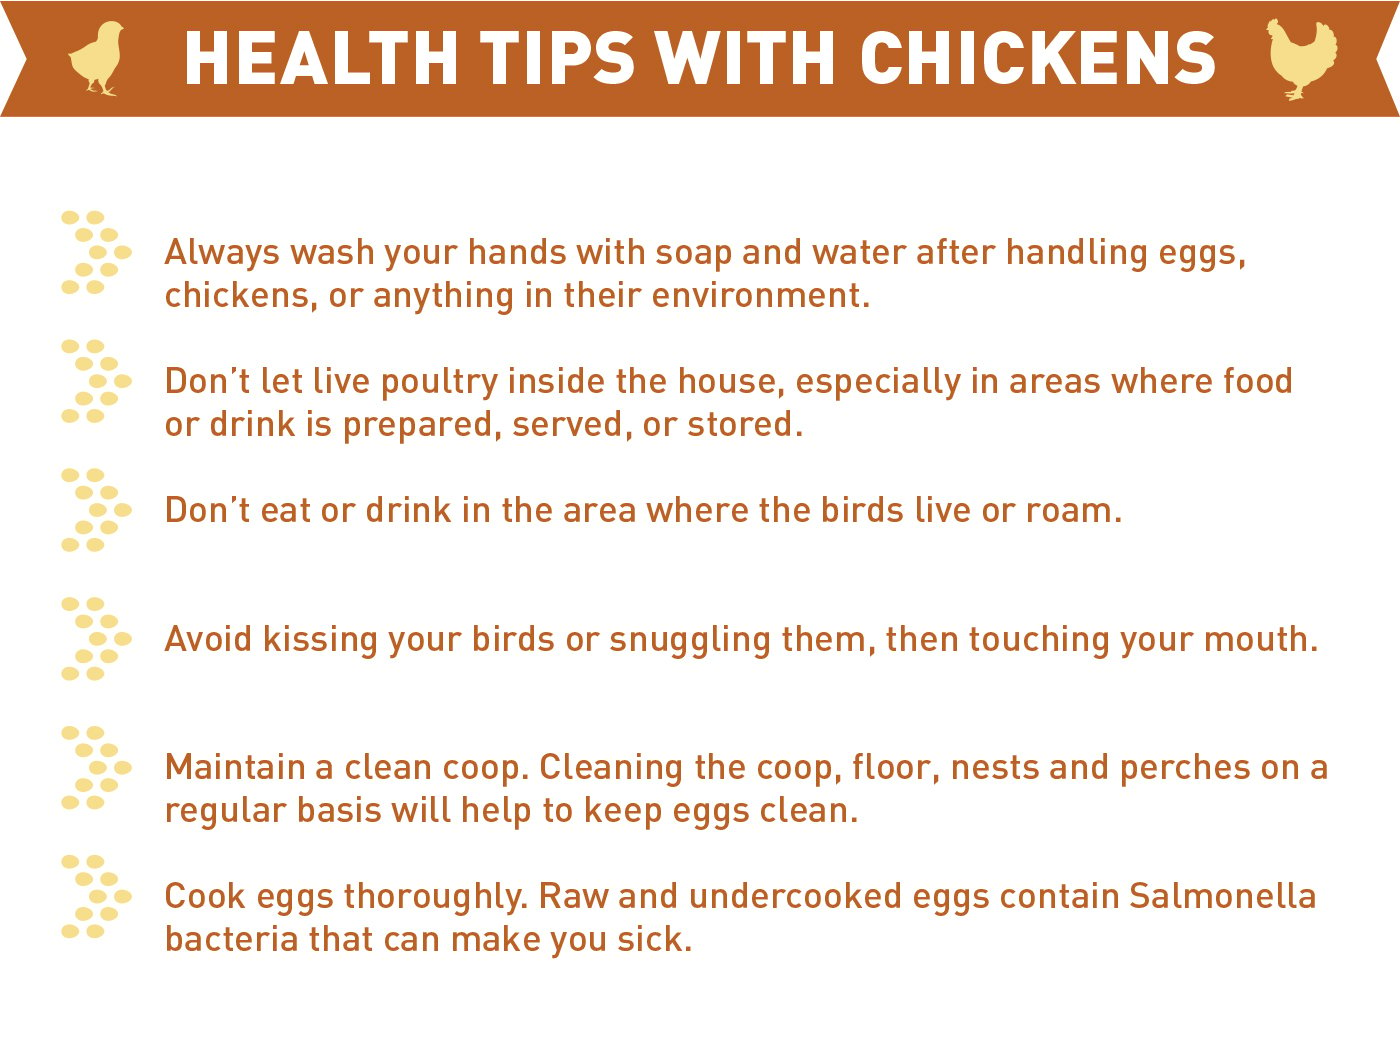 health tips for caring for your chickens